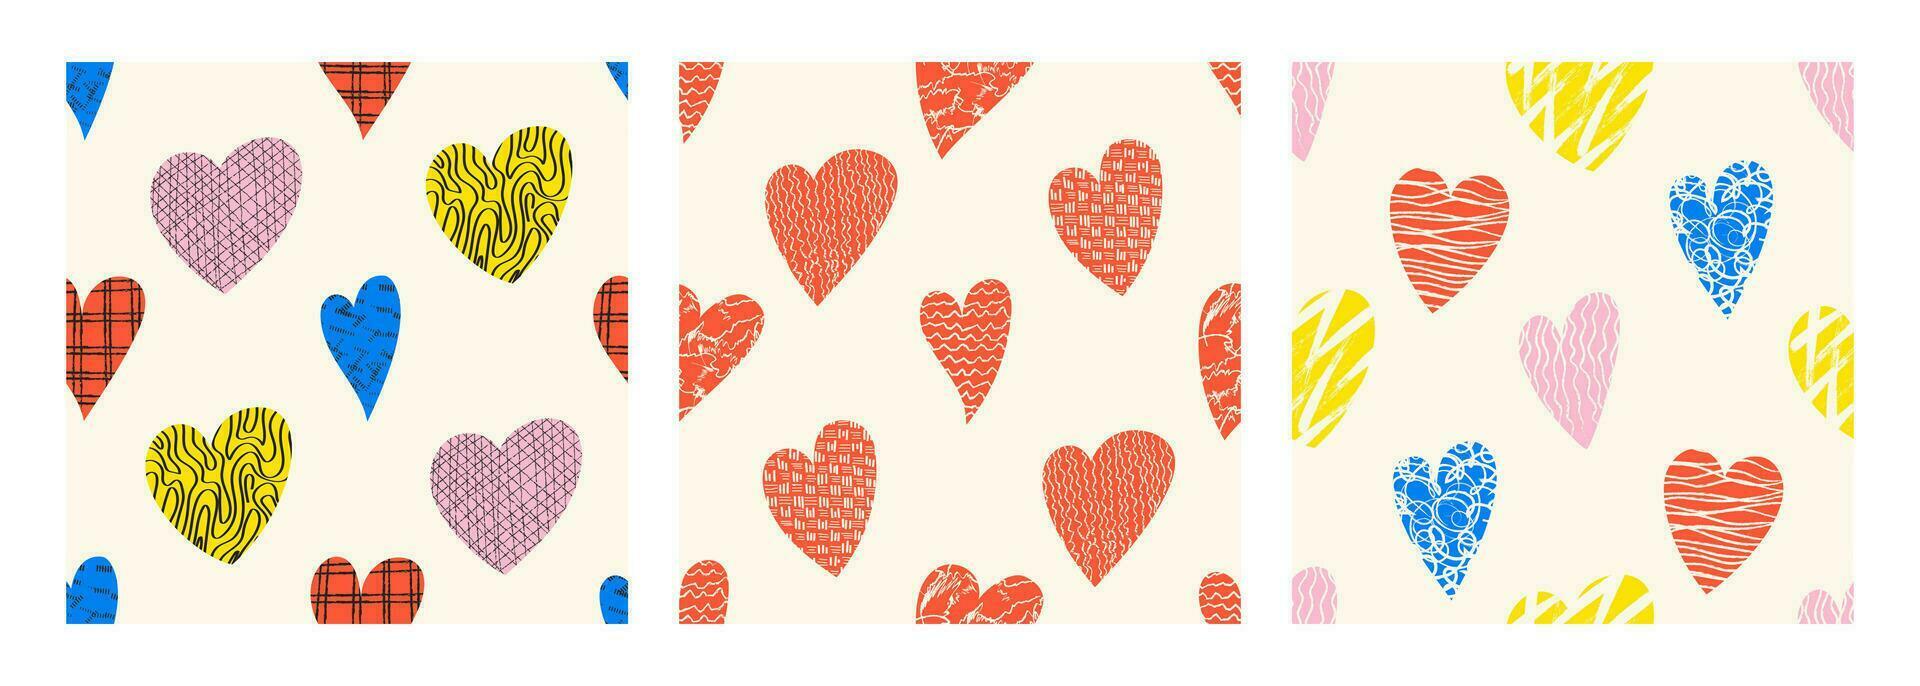 Naive playful hearts with loop, drops, spots, curves, lines and waves seamless pattern. Hand drawn doodle elements. Vector illustration with wavy and spiral elements.